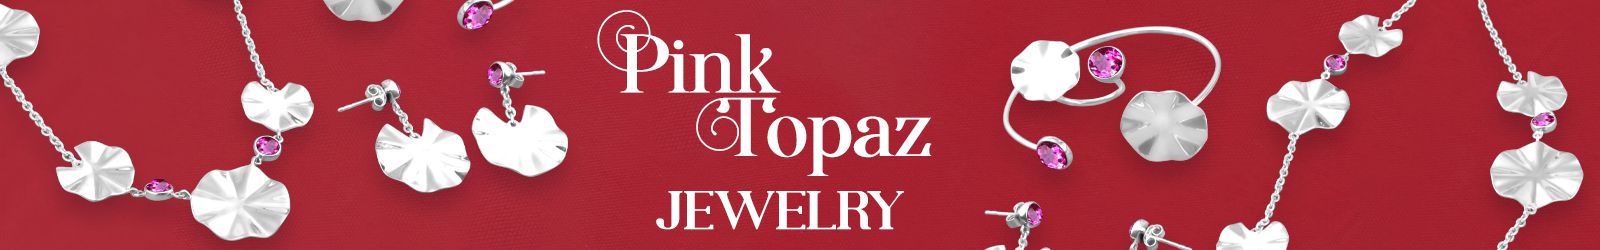 Silver Pink Topaz Jewelry Wholesale Supplier